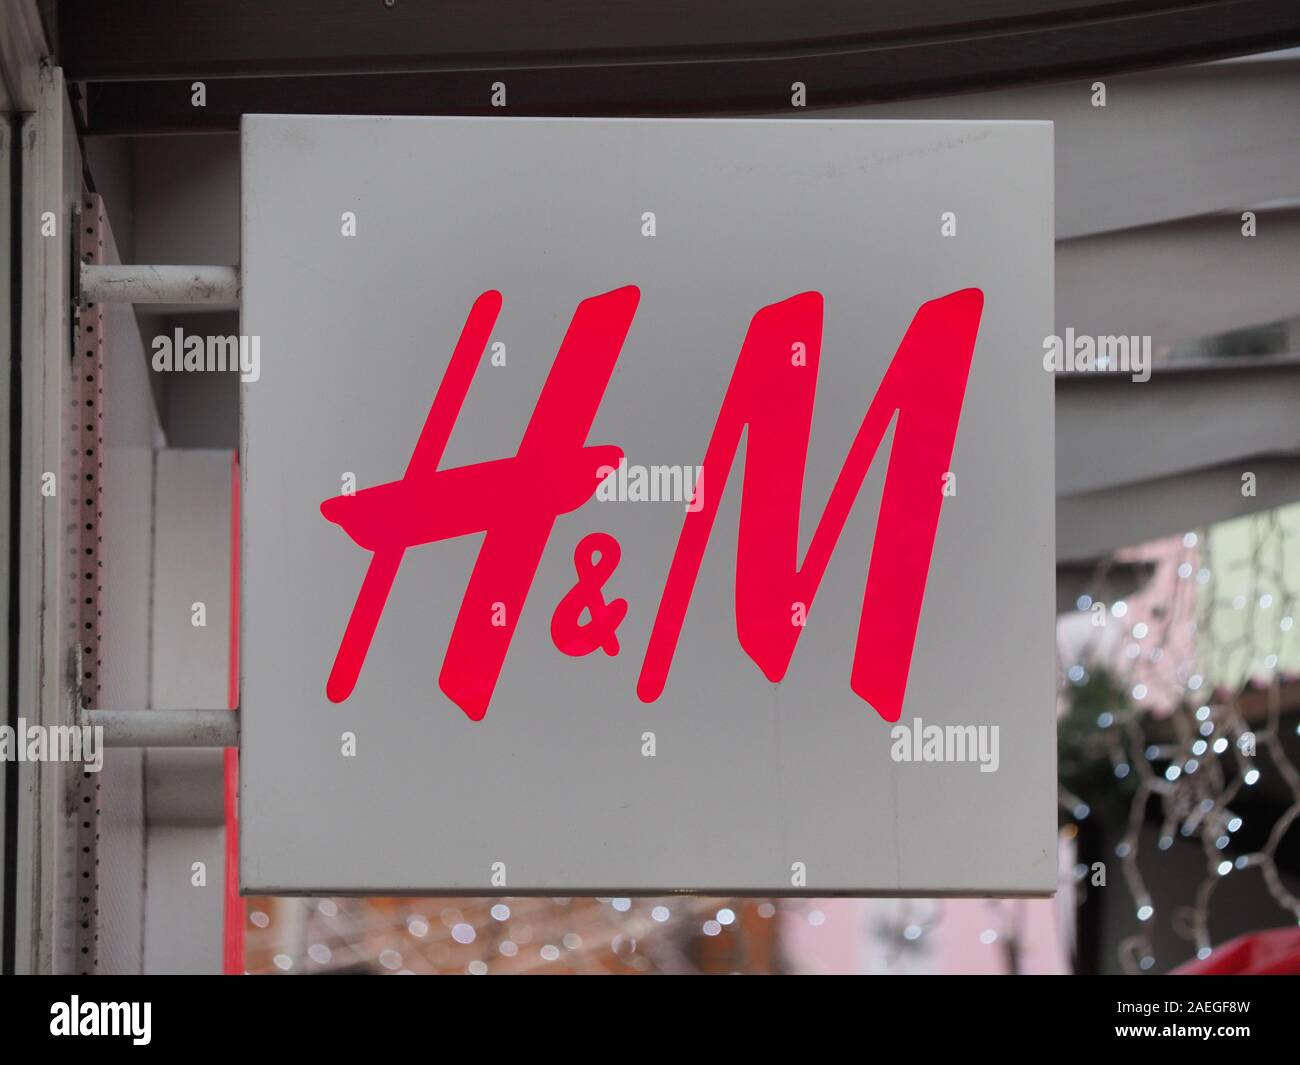 H&m Shop Sign High Resolution Stock Photography and Images - Alamy